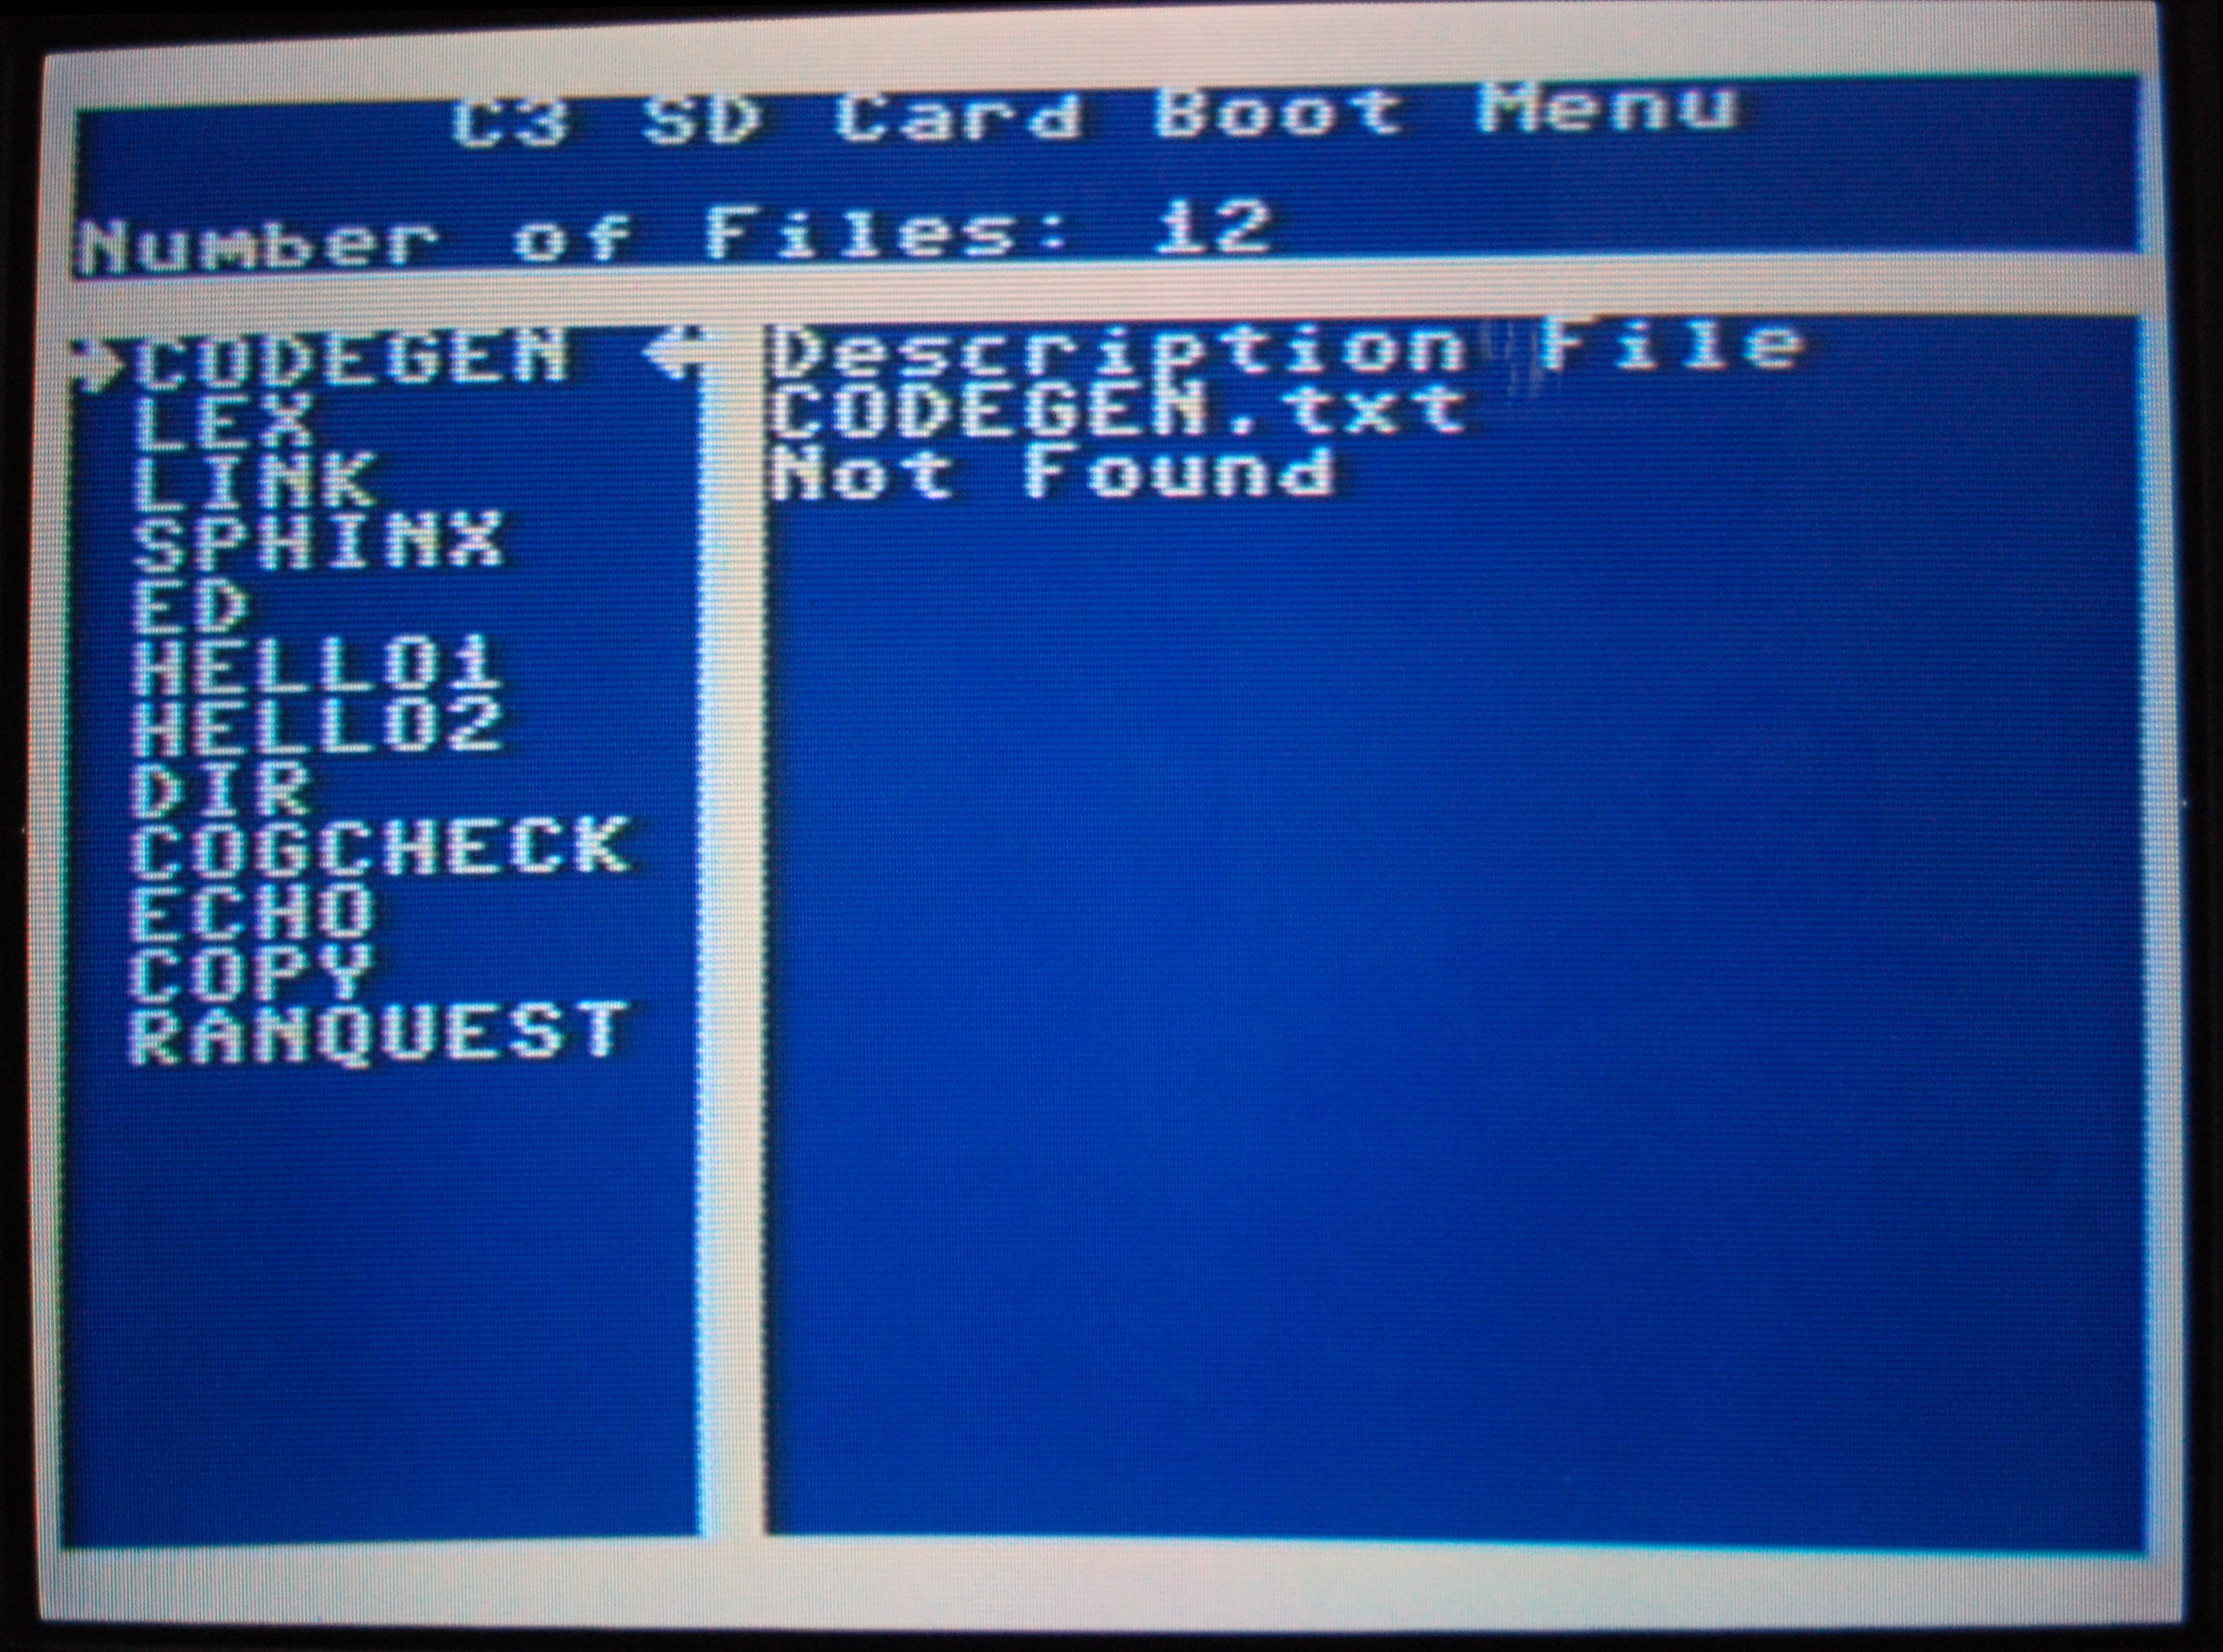 The Propeller C3 Boot Menu allows the C3 to boot from the SD Card!